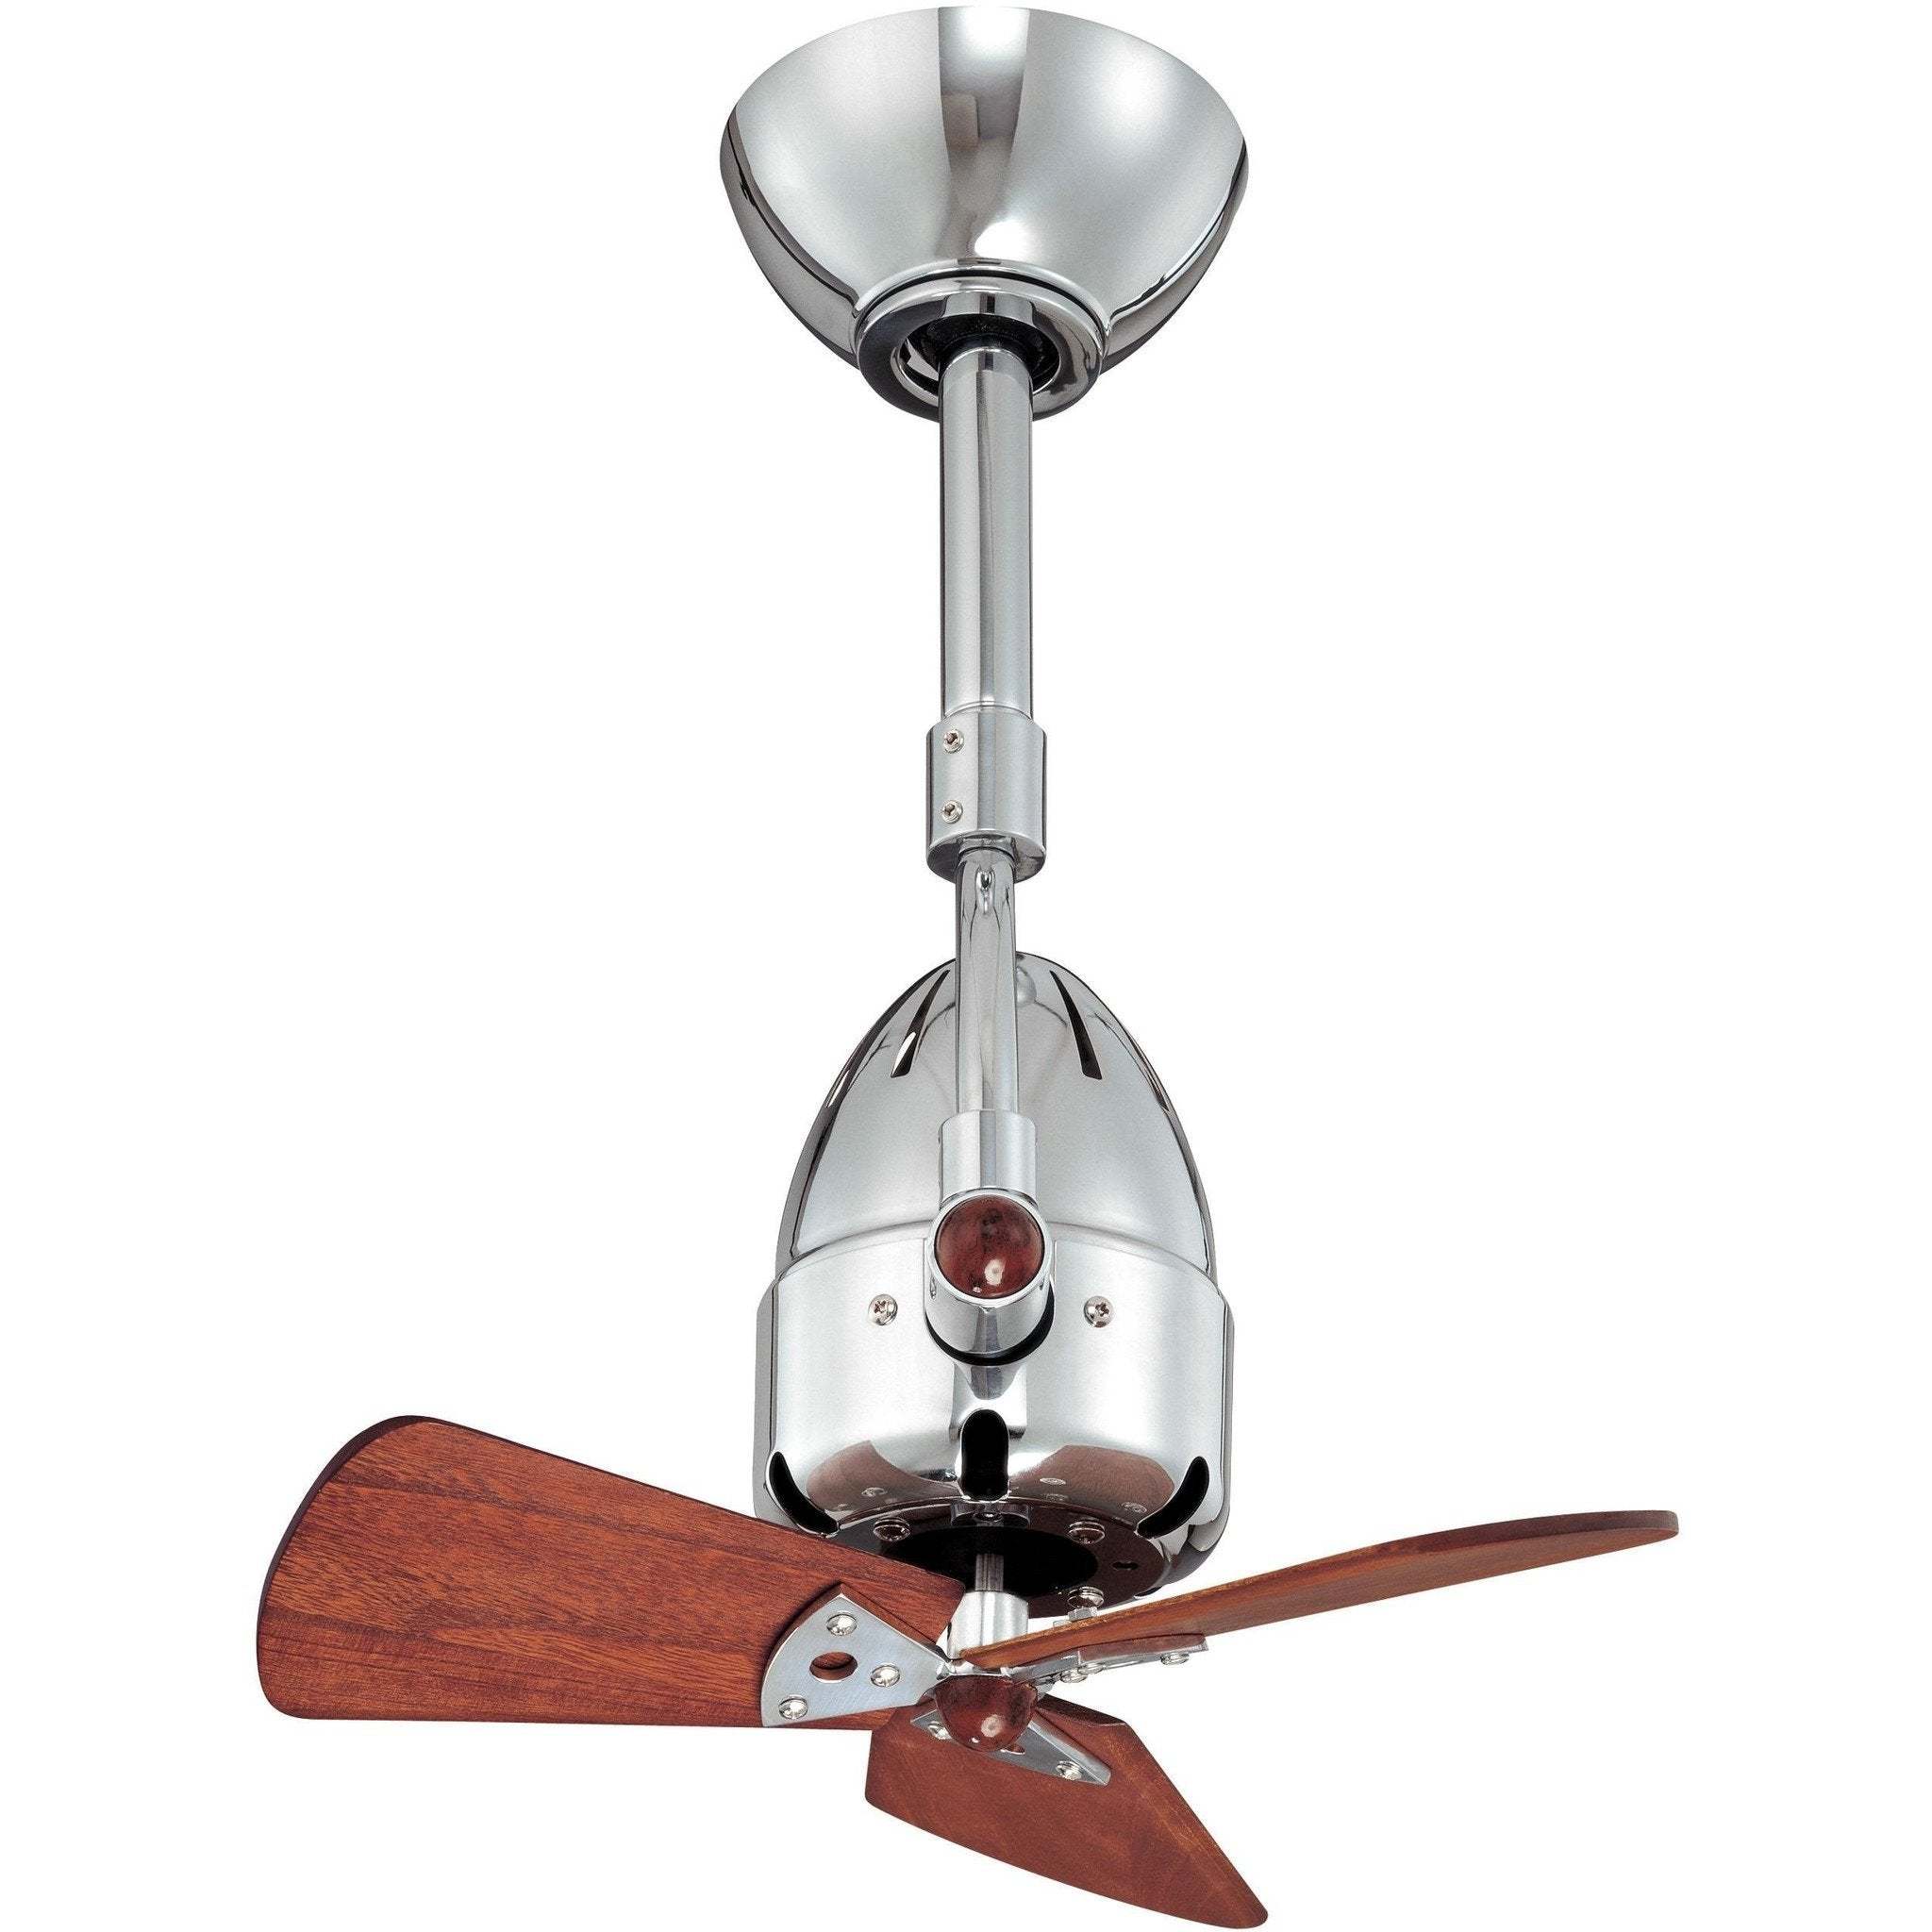 Shown in Polished Chrome, Wood Blades, 